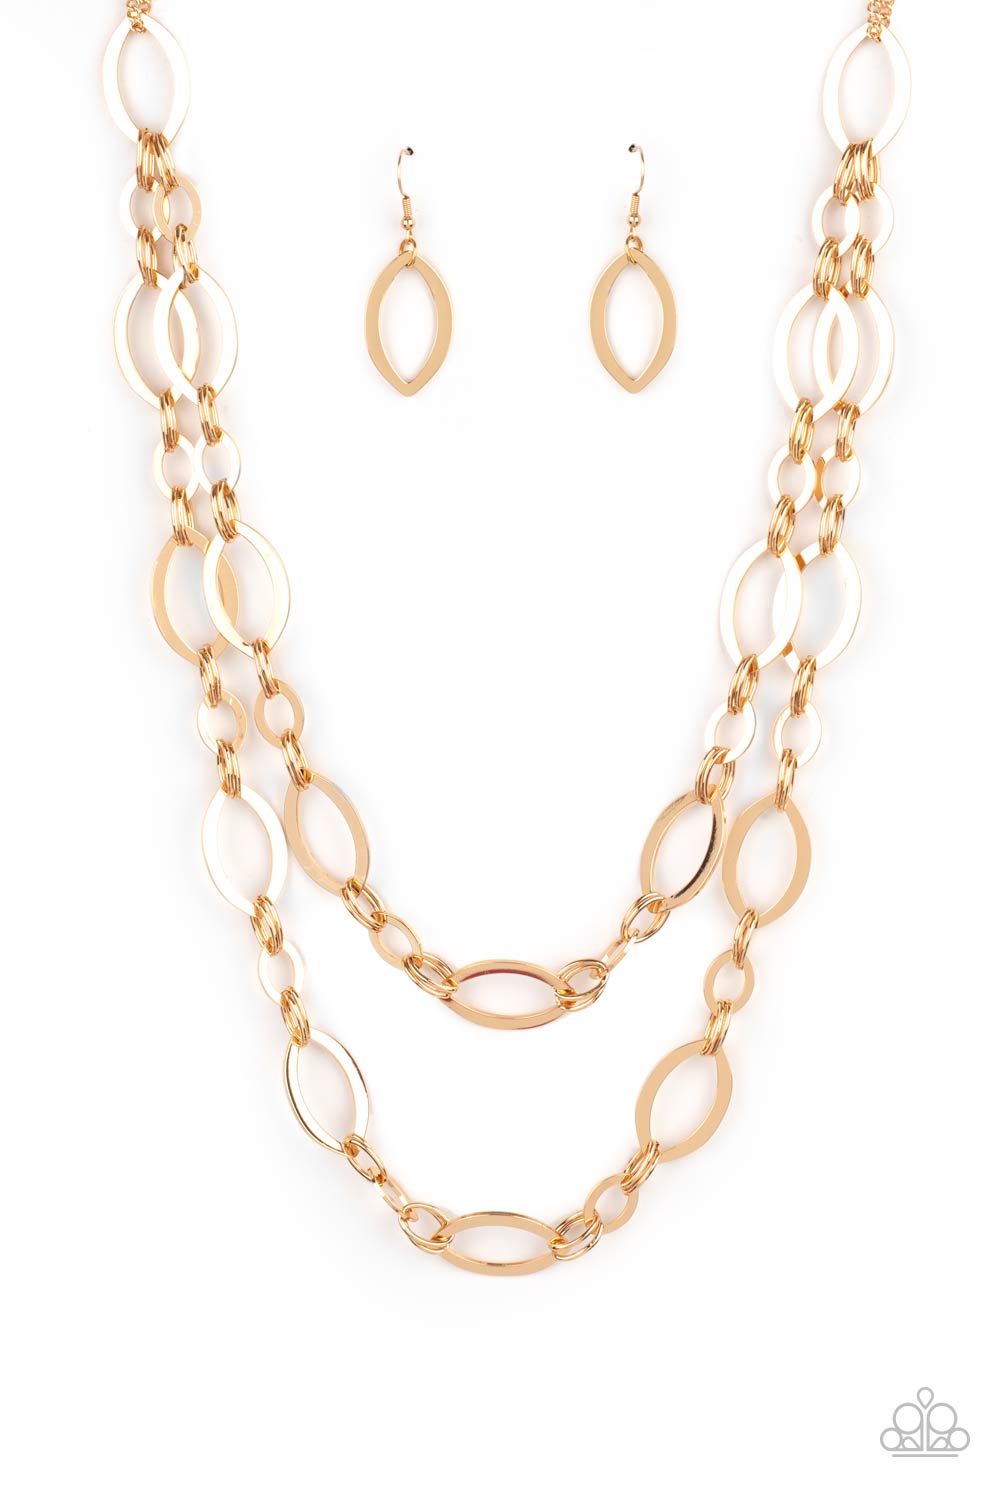 The OVAL-achiever - gold - Paparazzi necklace